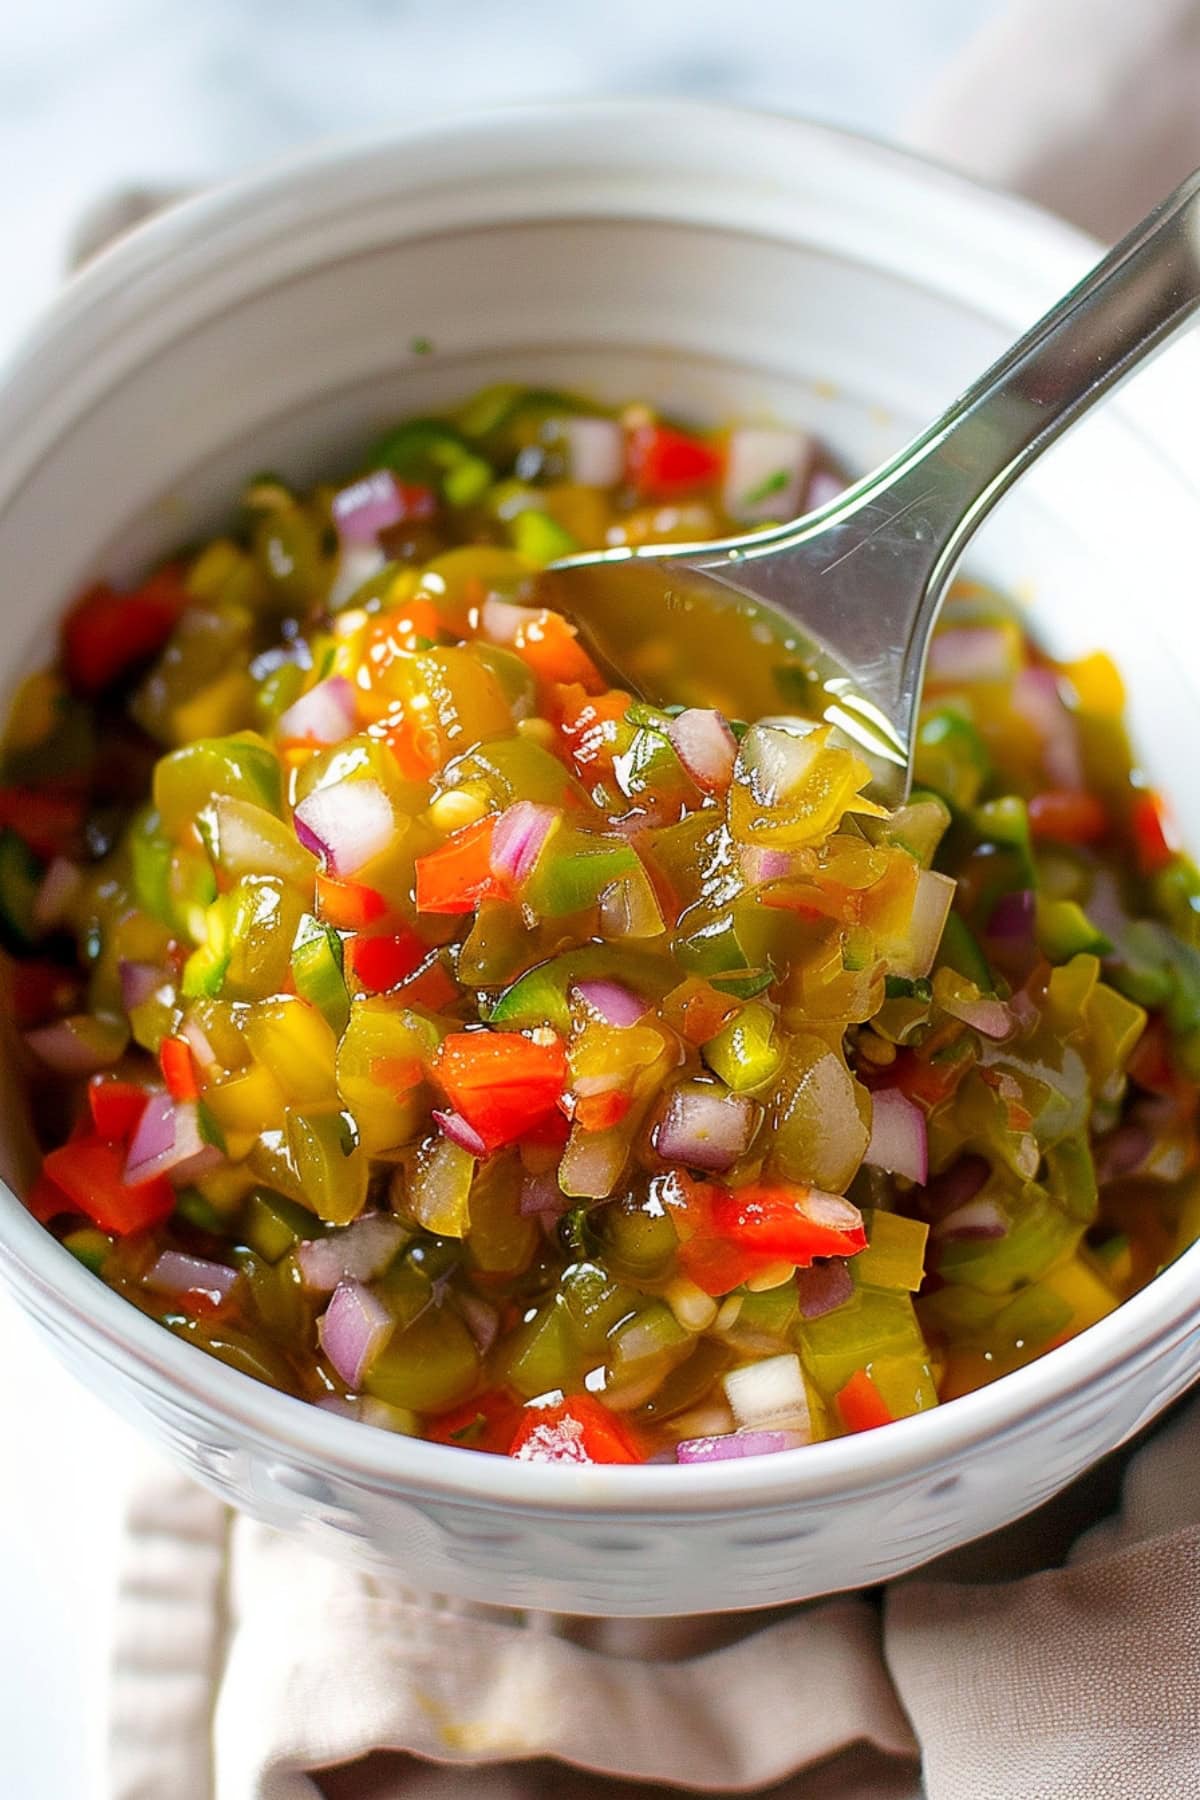 Zesty pepperoncini relish, bursting with tangy flavor and a hint of spice